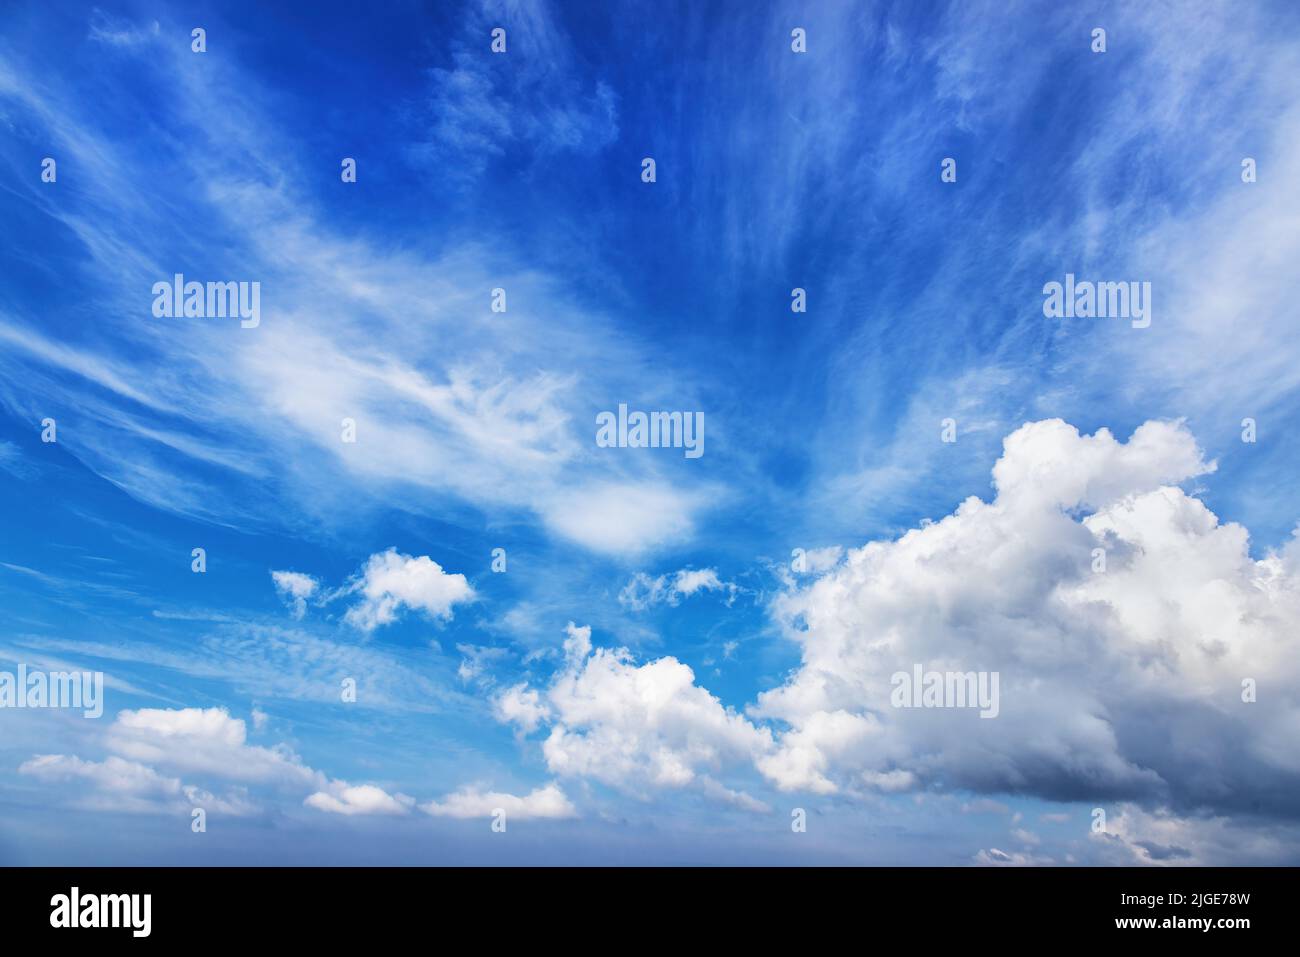 Summer blue sky and white clouds background. Tranquil backdrop, ideal for compositing. Stock Photo